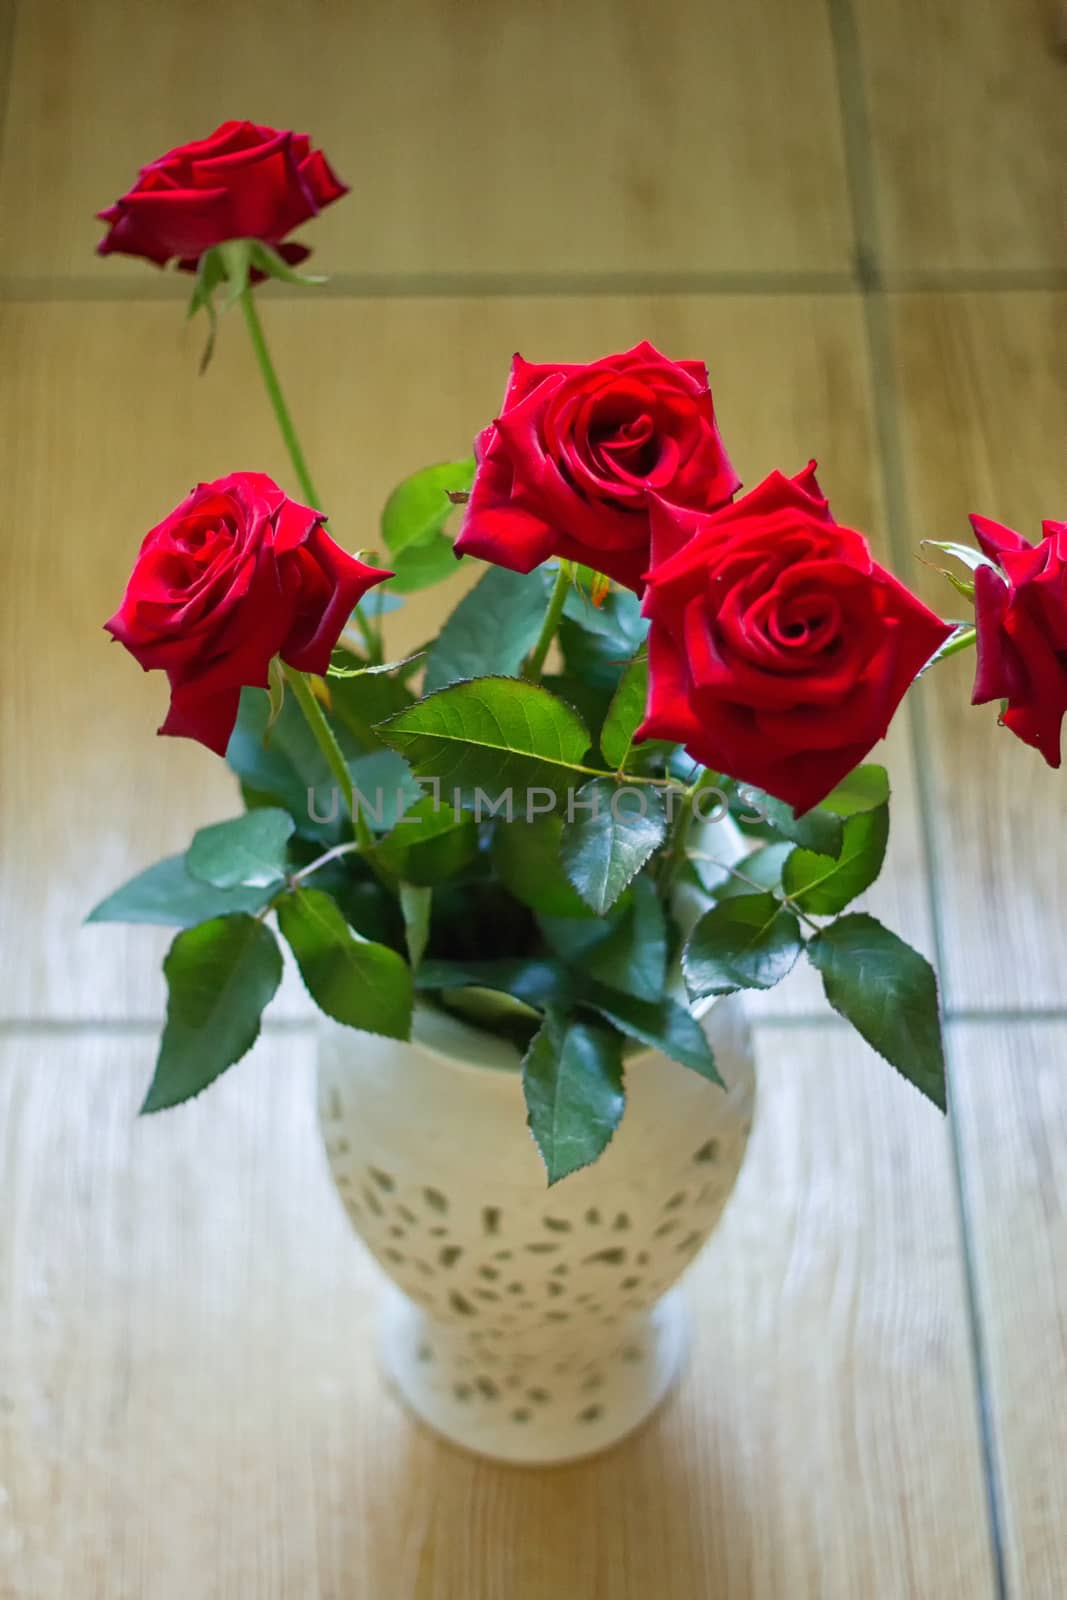 bouquet of roses in a vase of glass, interior decoration